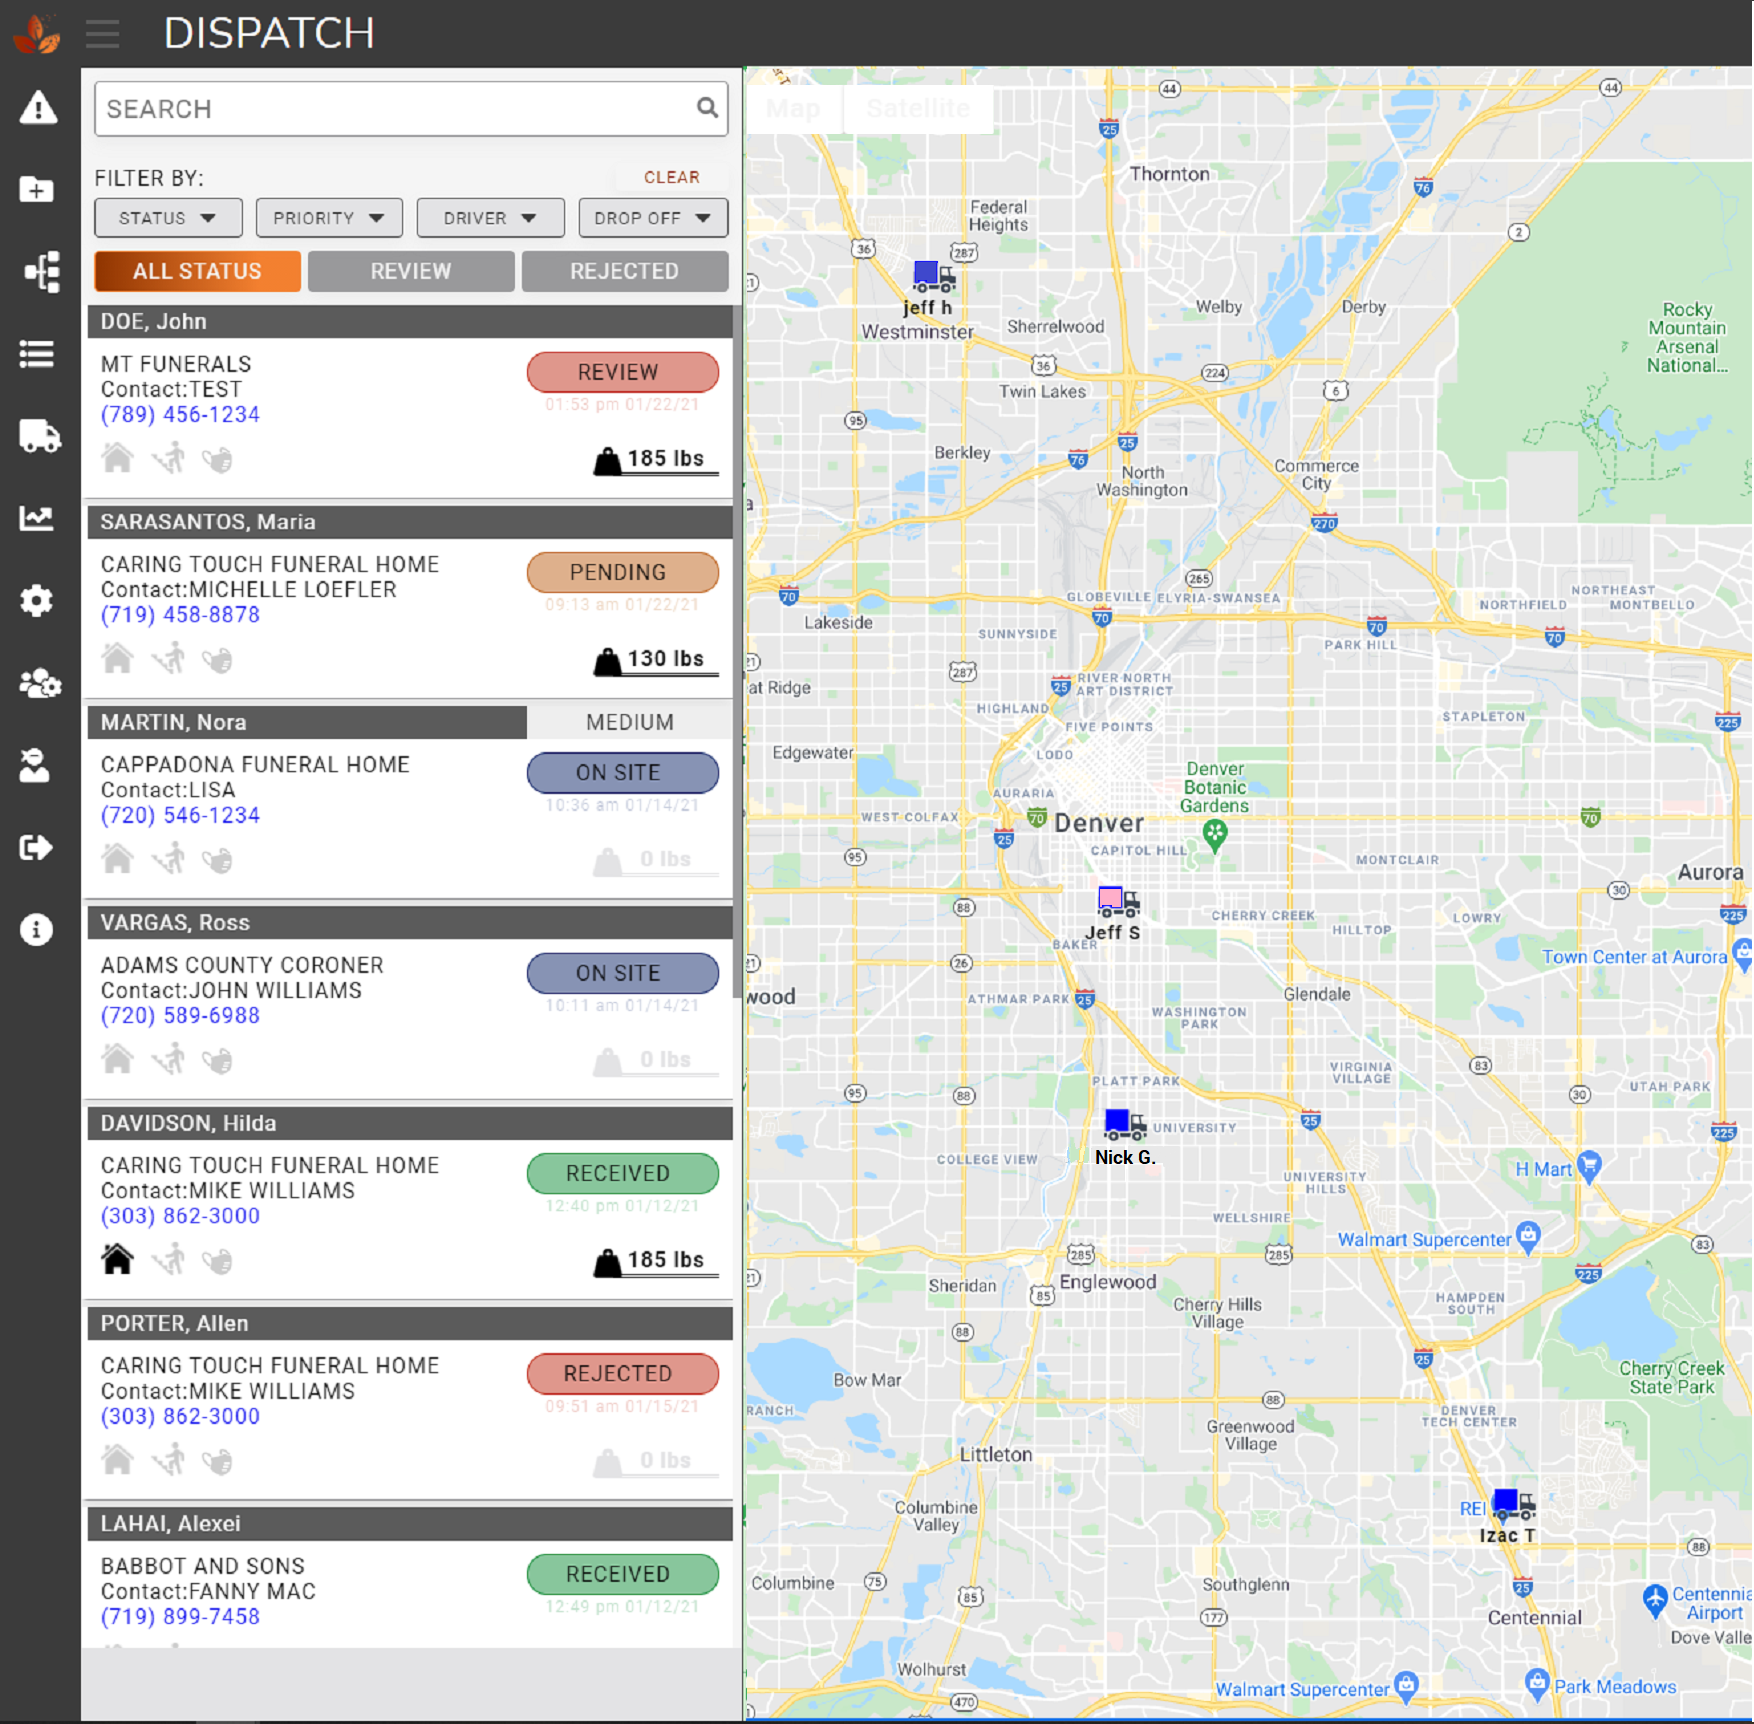 Mortrack's real-time location tracking feature allows dispatchers to assign cases to the most appropriate removal tech and vehicle, saving mileage, fuel costs, and wear and tear on your vehicles.